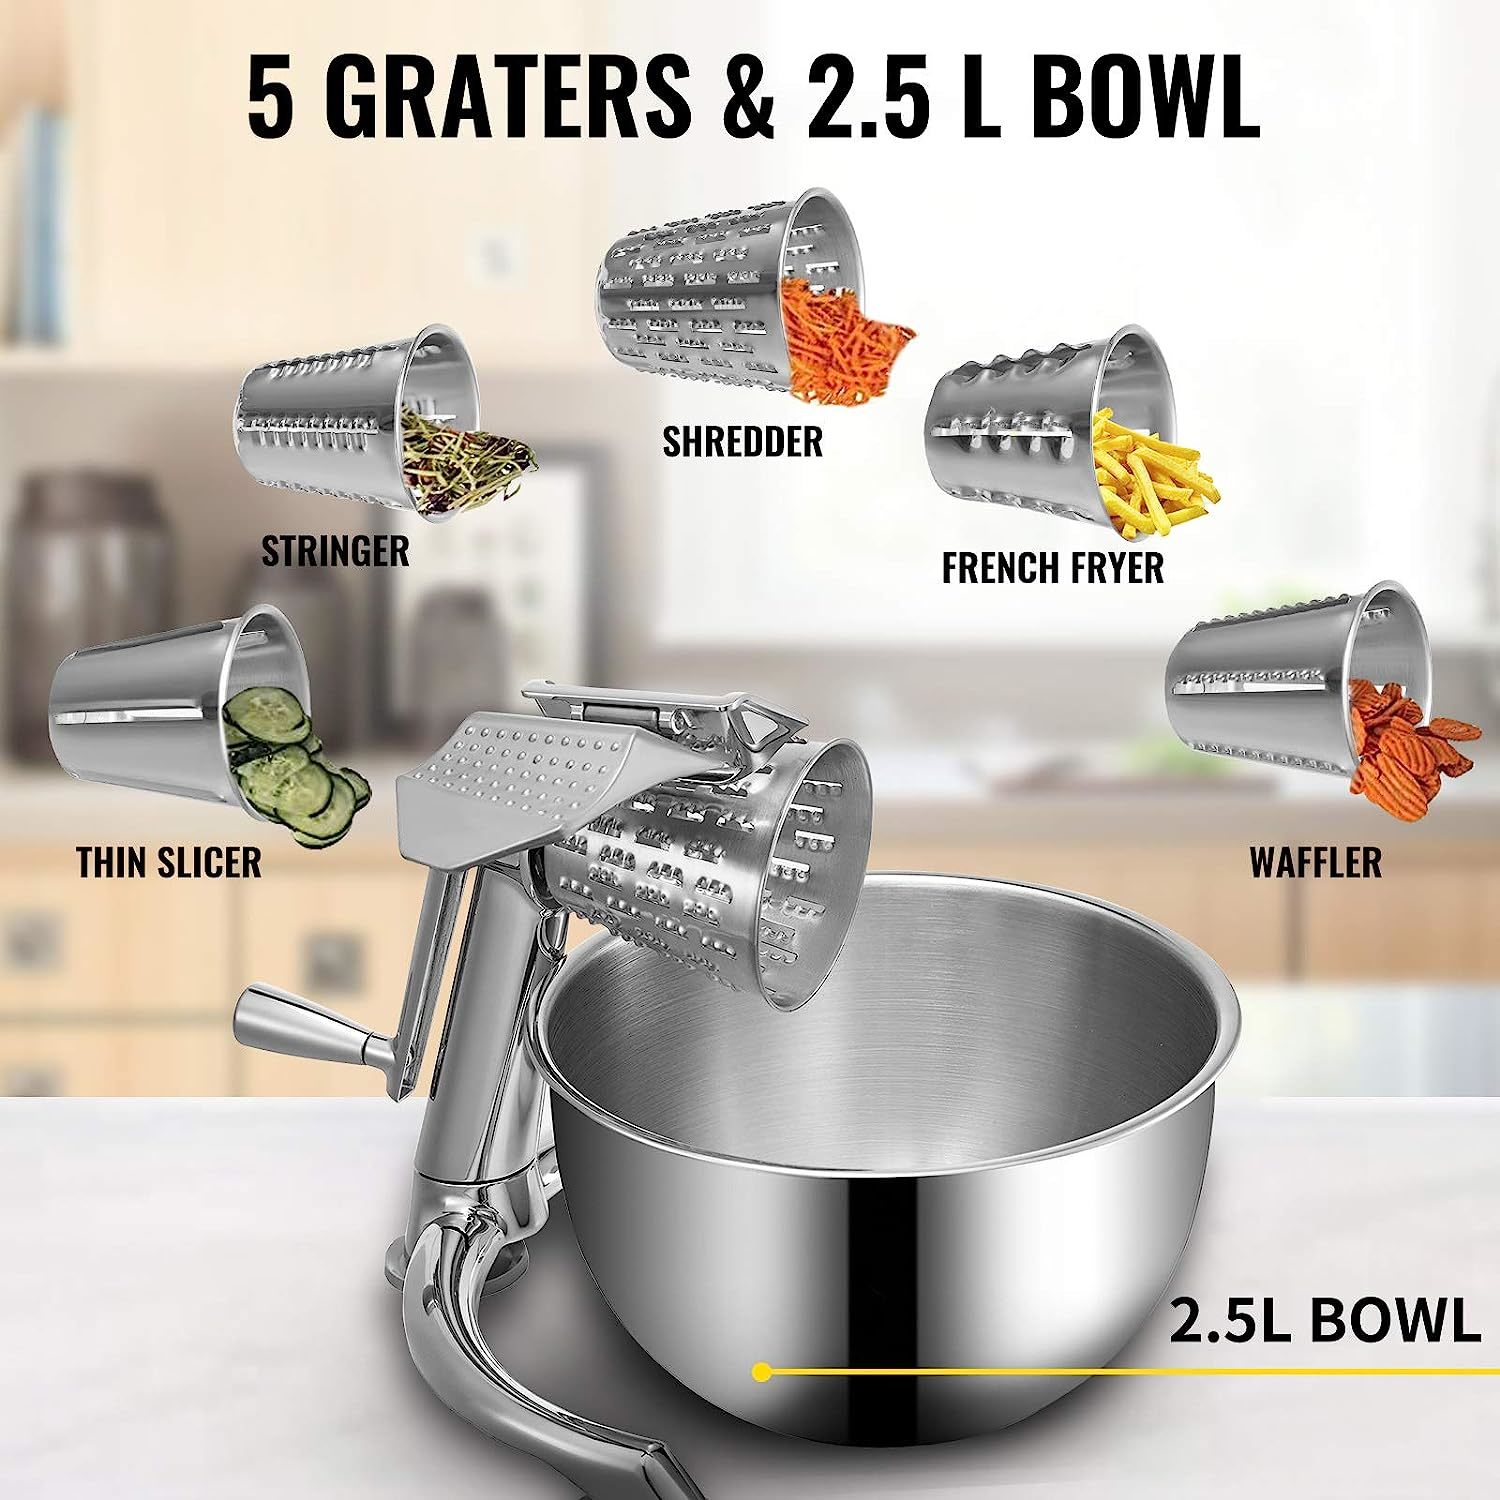 Winco Stainless Steel Rotary Cheese Grater